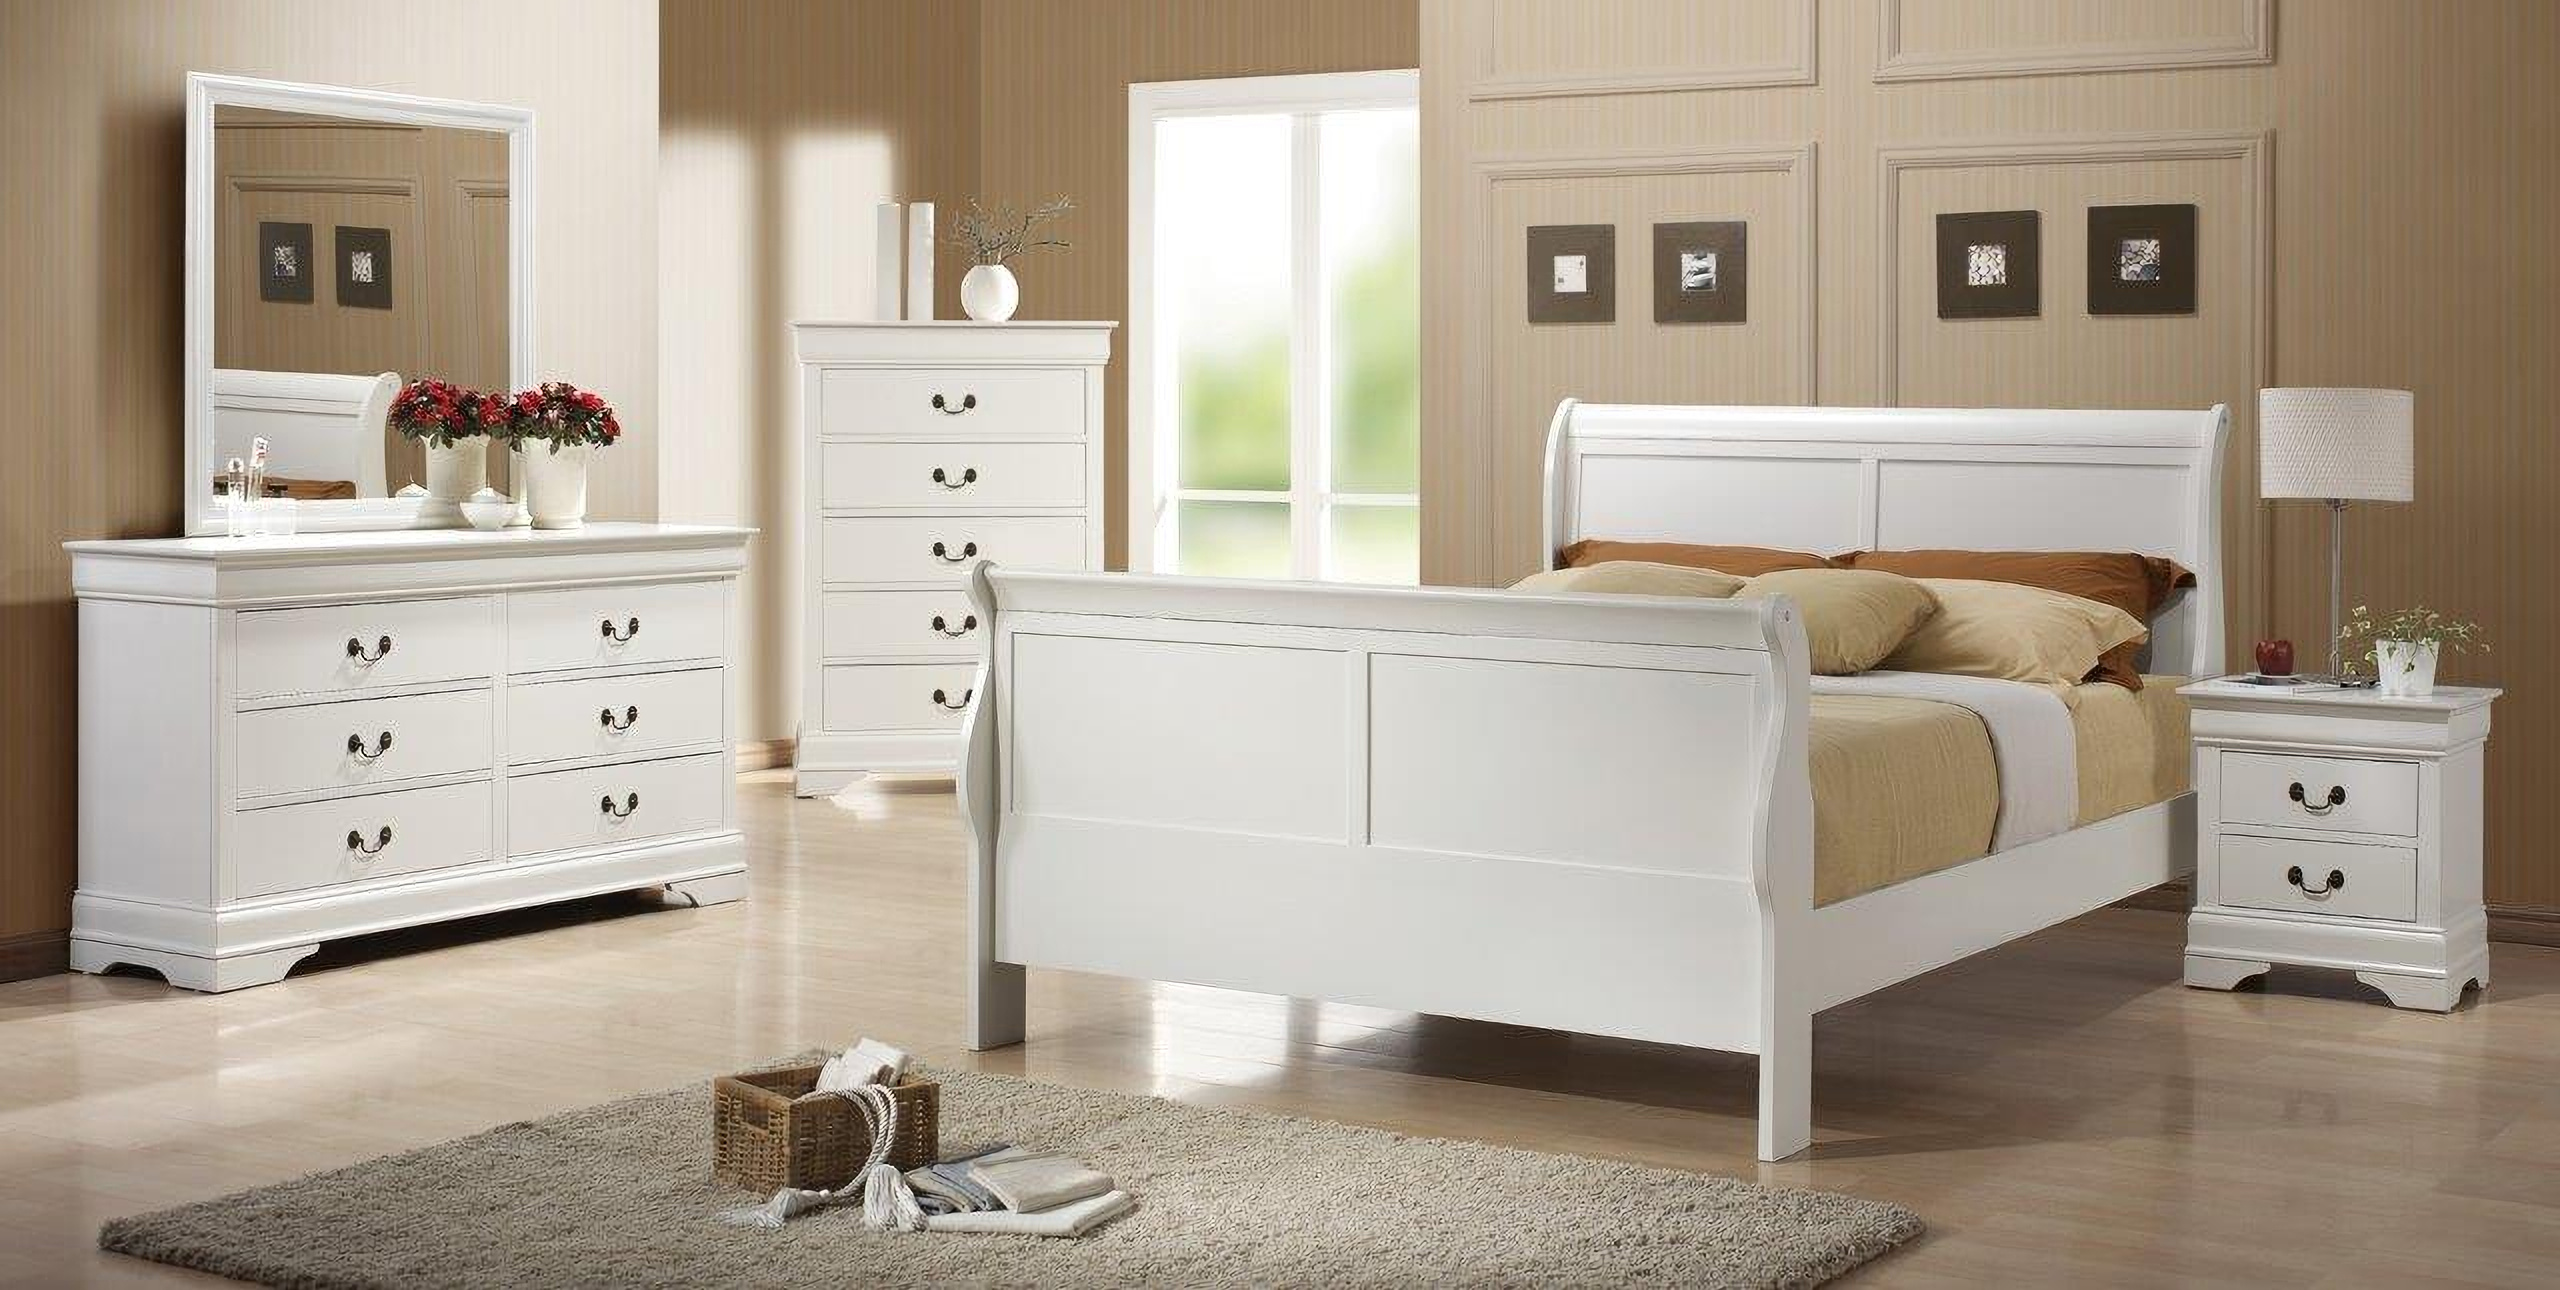 8.H Acme Louis Philippe lll 2pc Panel Bedroom Set in Real White